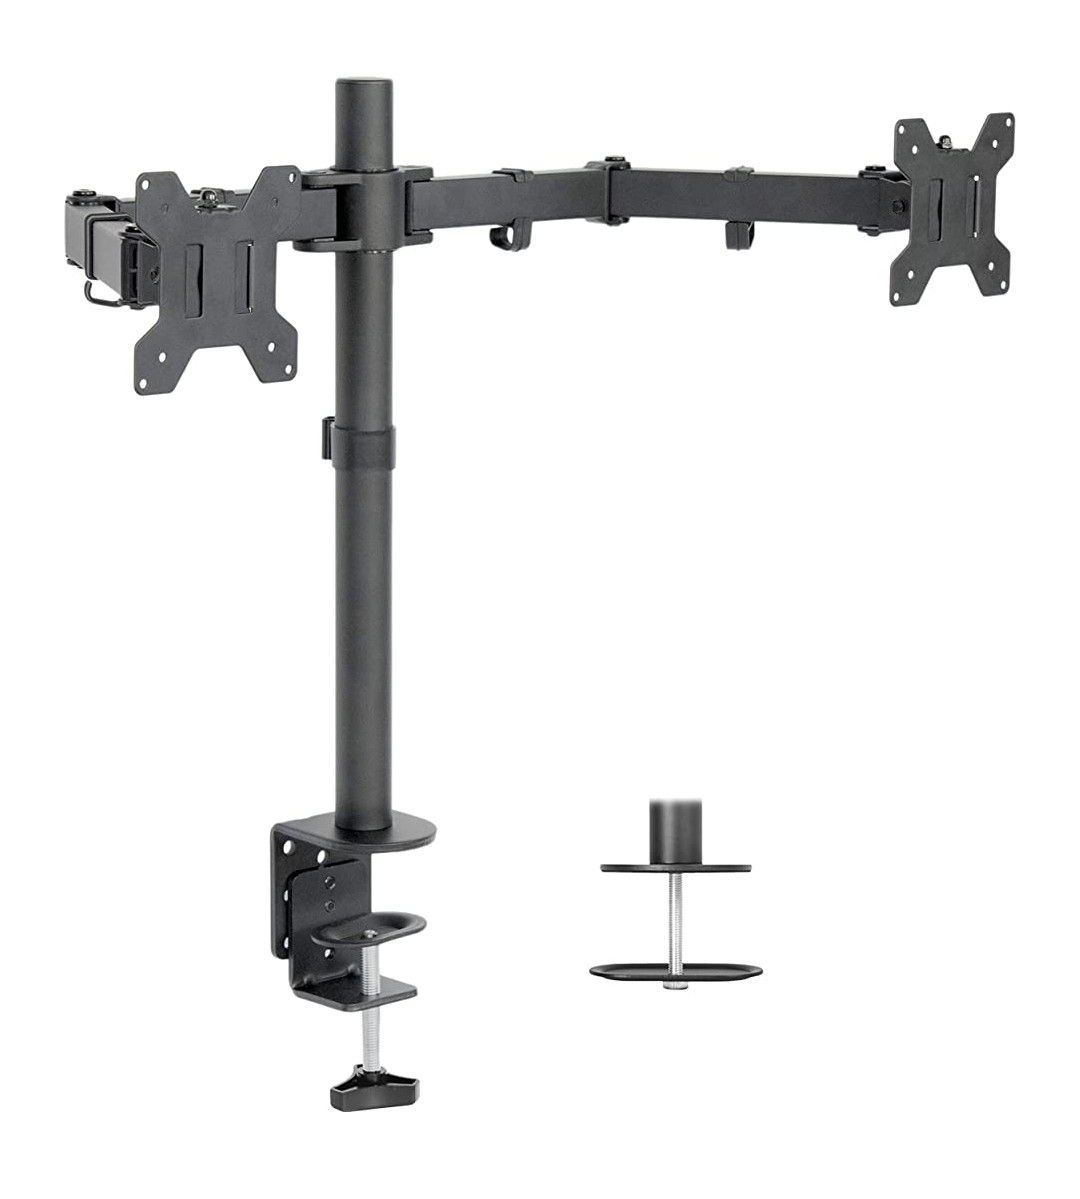 Dual LCD Monitor Desk Mount Stand Heavy Duty Fully Adjustable fits 2 /Two Screens up to 27"